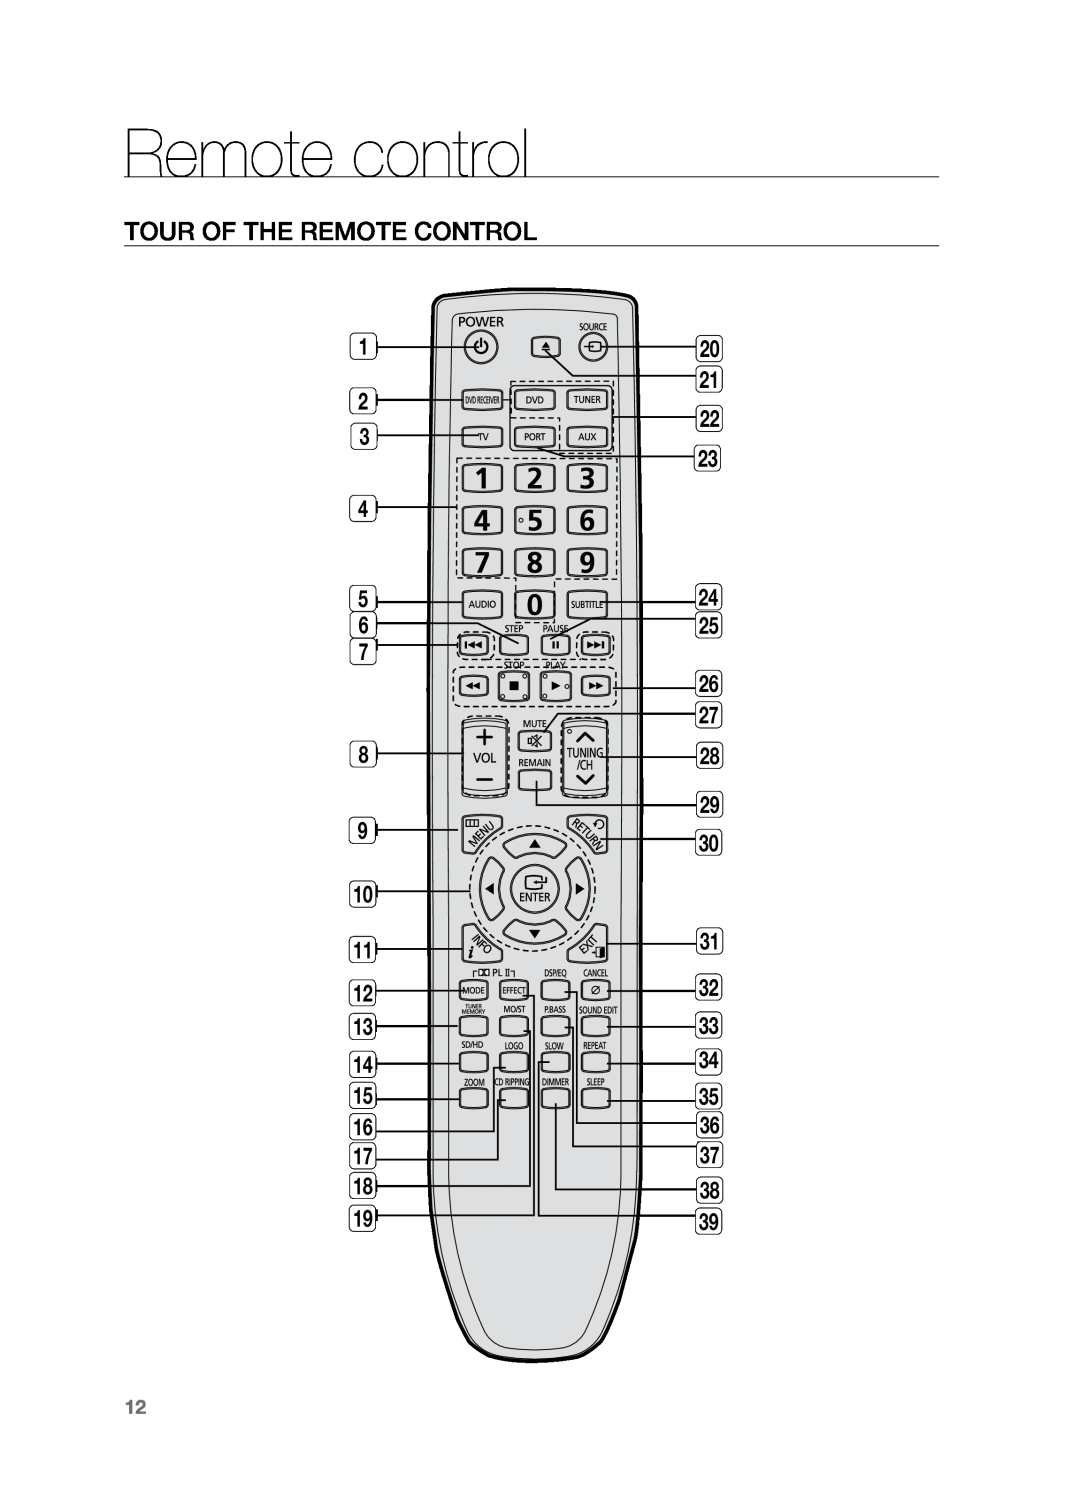 Samsung HT-Z221 user manual Remote control, Tour of the Remote Control 